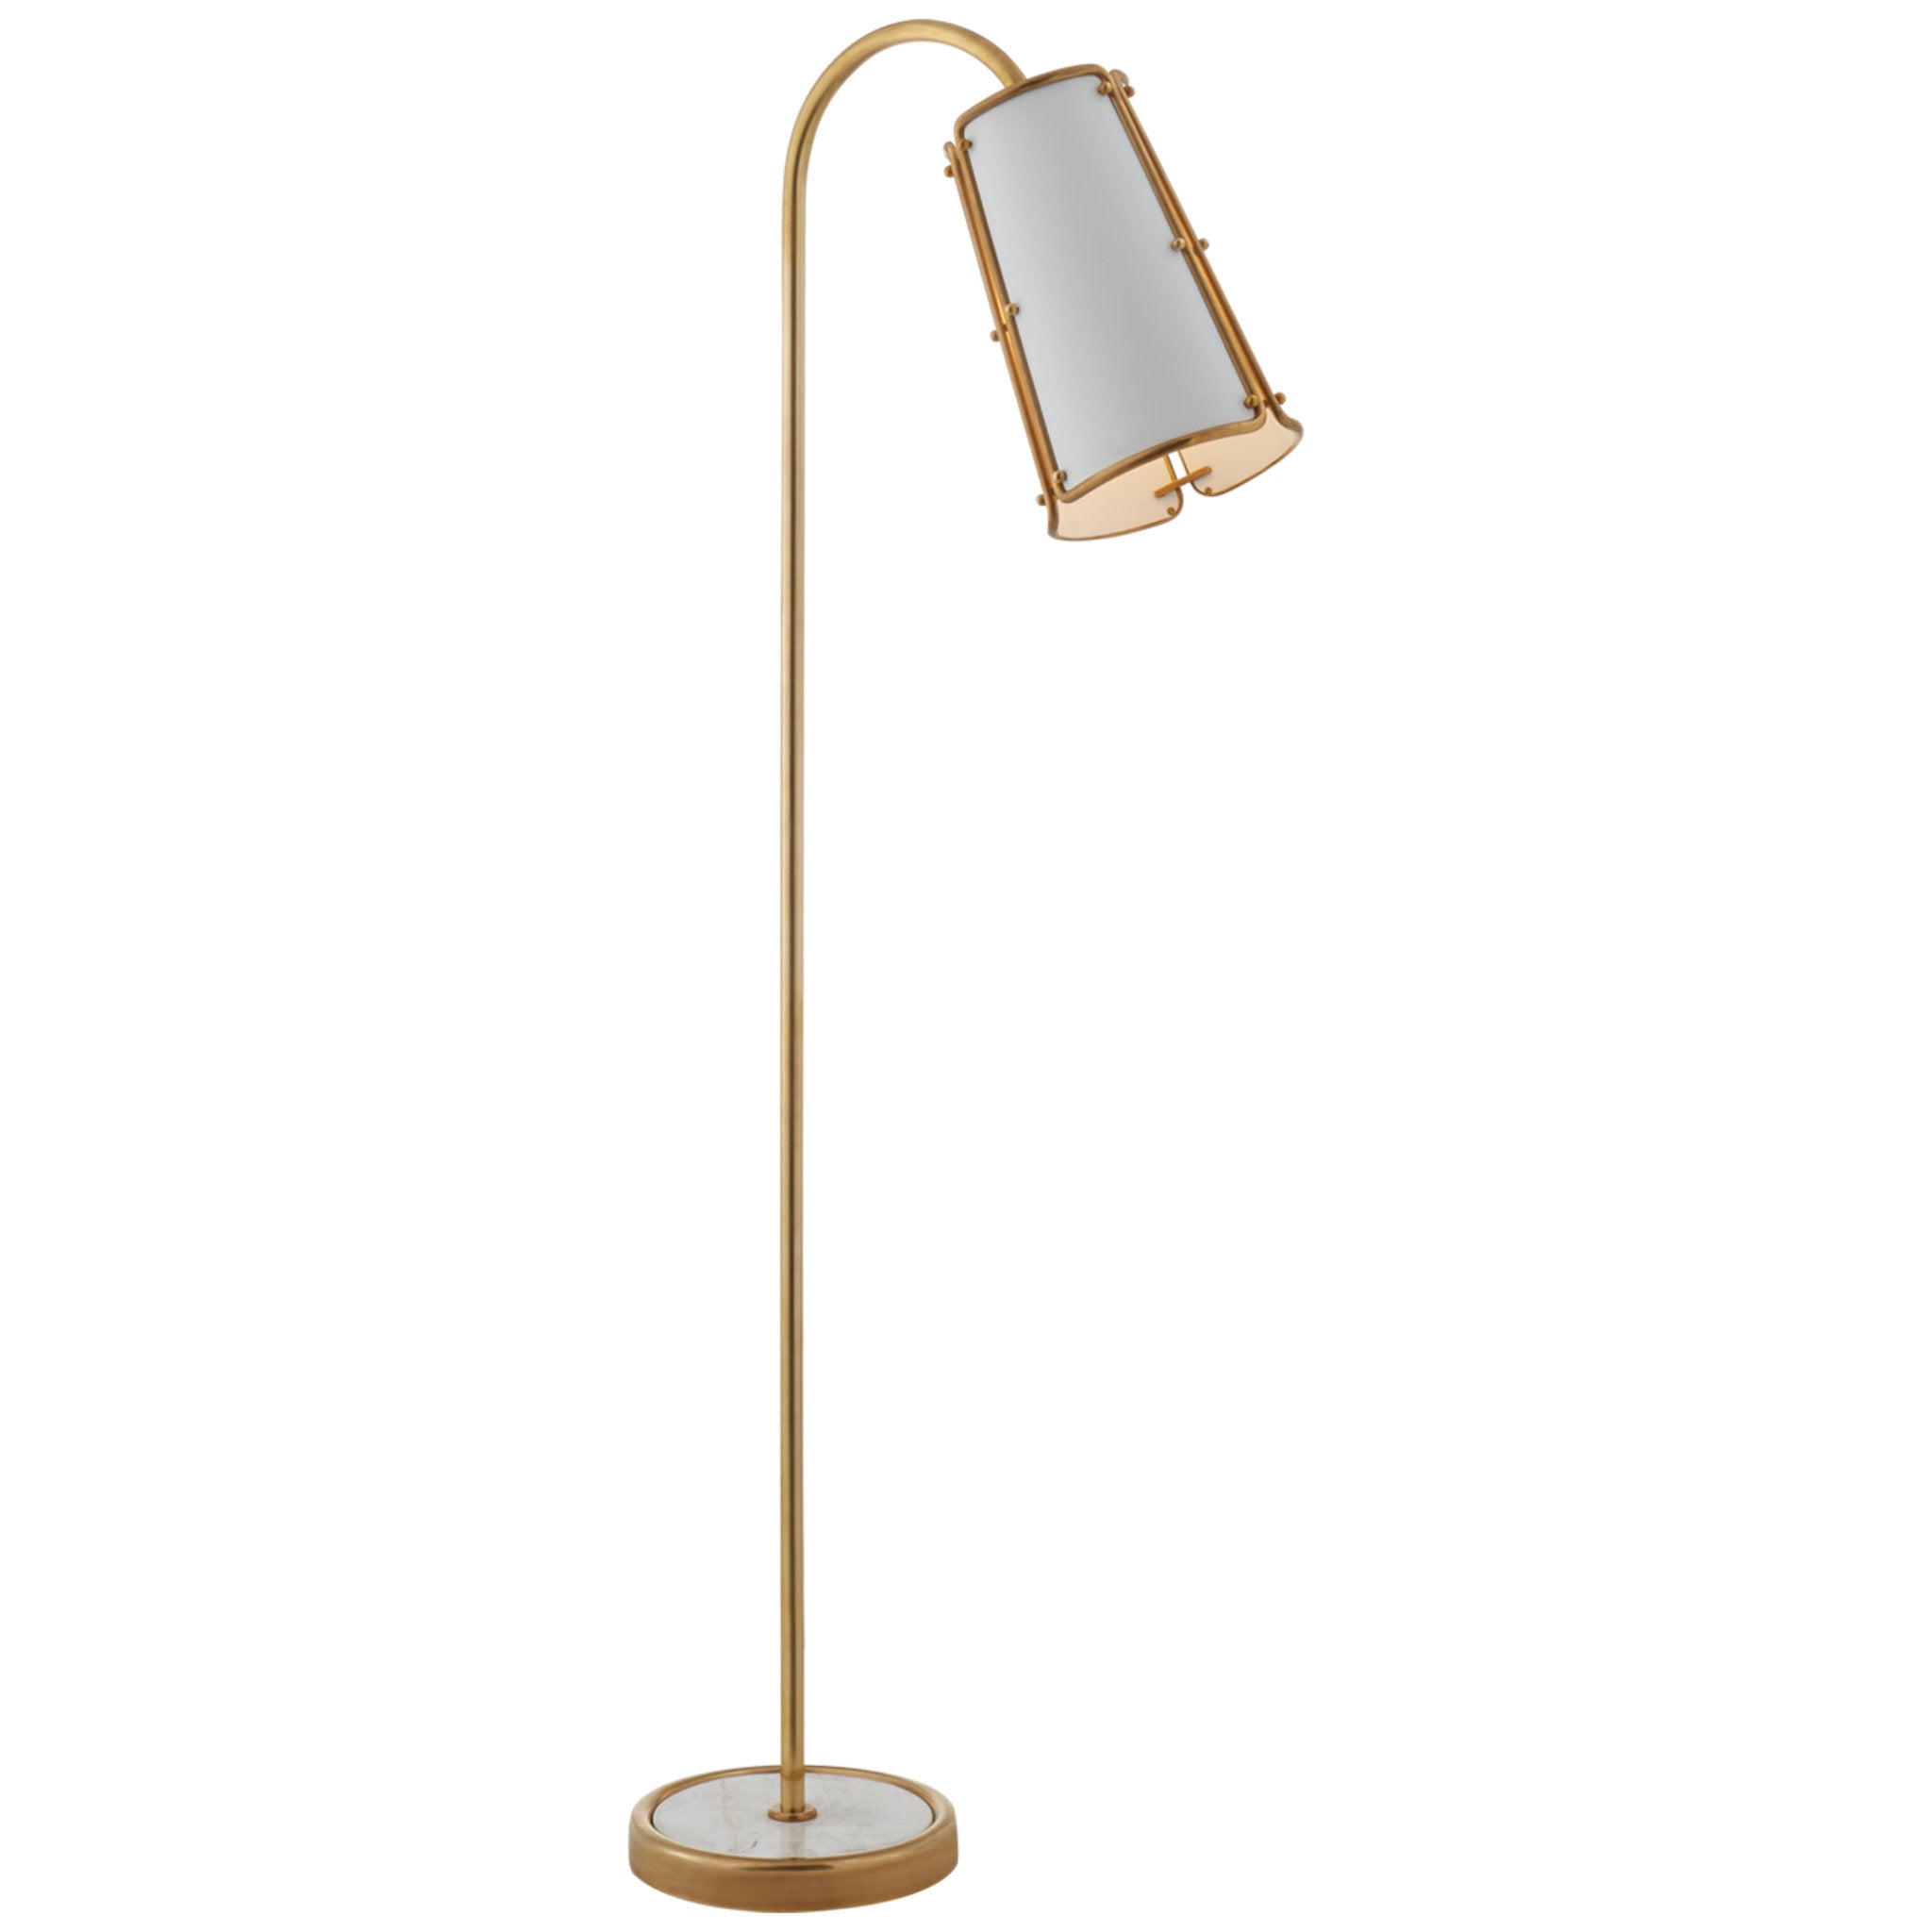 Carrier and Company Hastings Medium Floor Lamp in Hand-Rubbed Antique Brass with White Shade